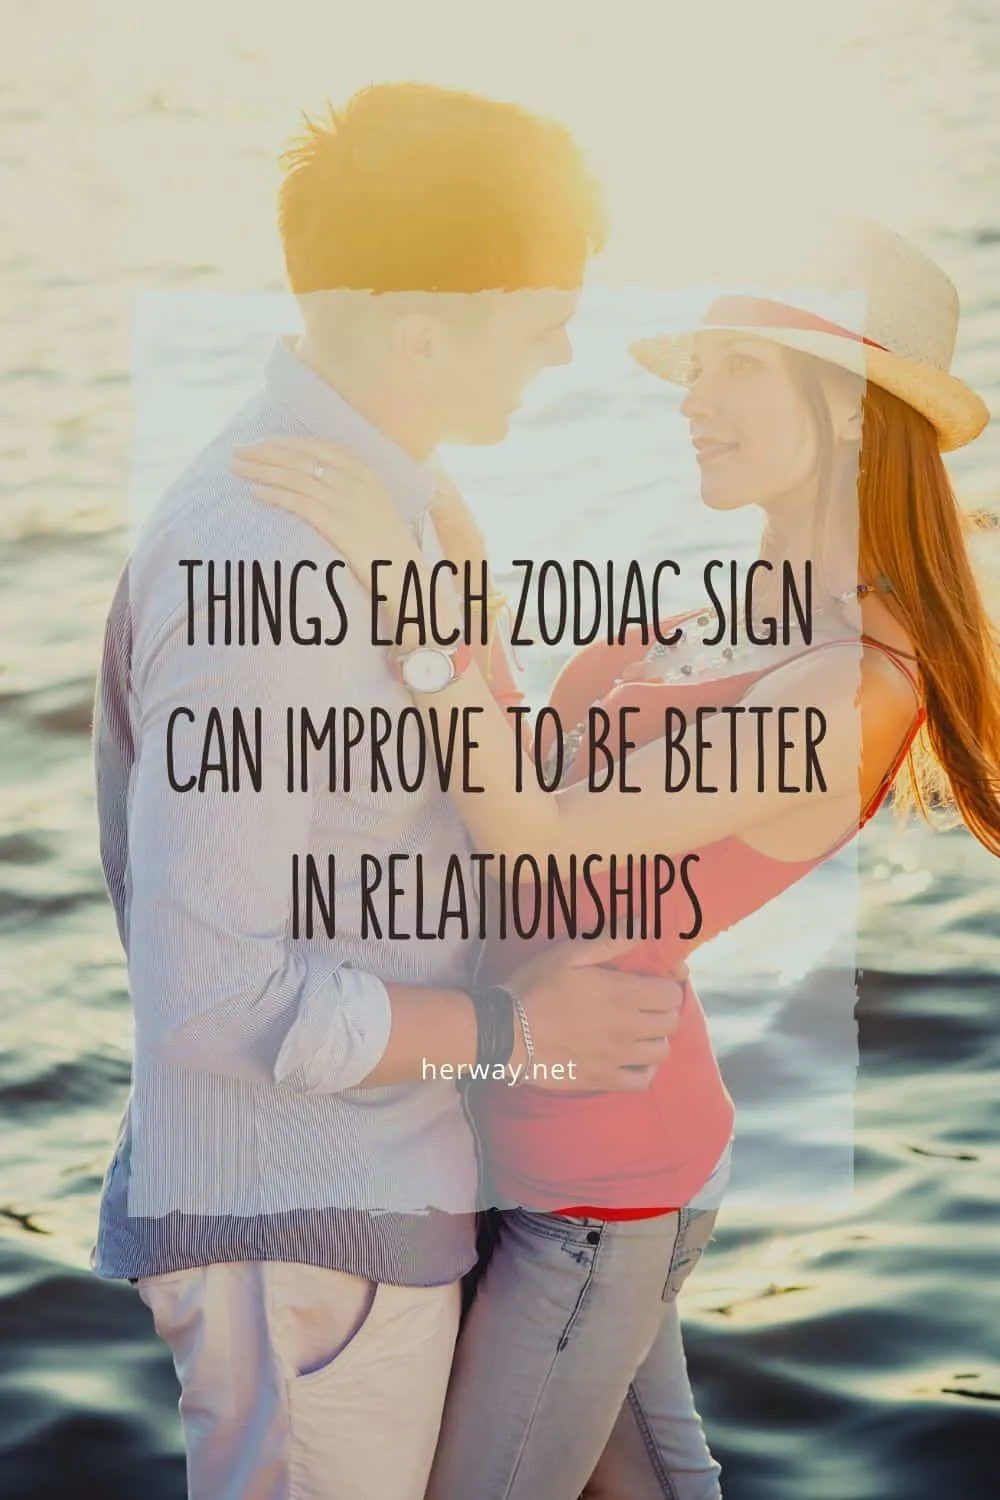 THINGS EACH ZODIAC SIGN CAN IMPROVE TO BE BETTER IN RELATIONSHIPS